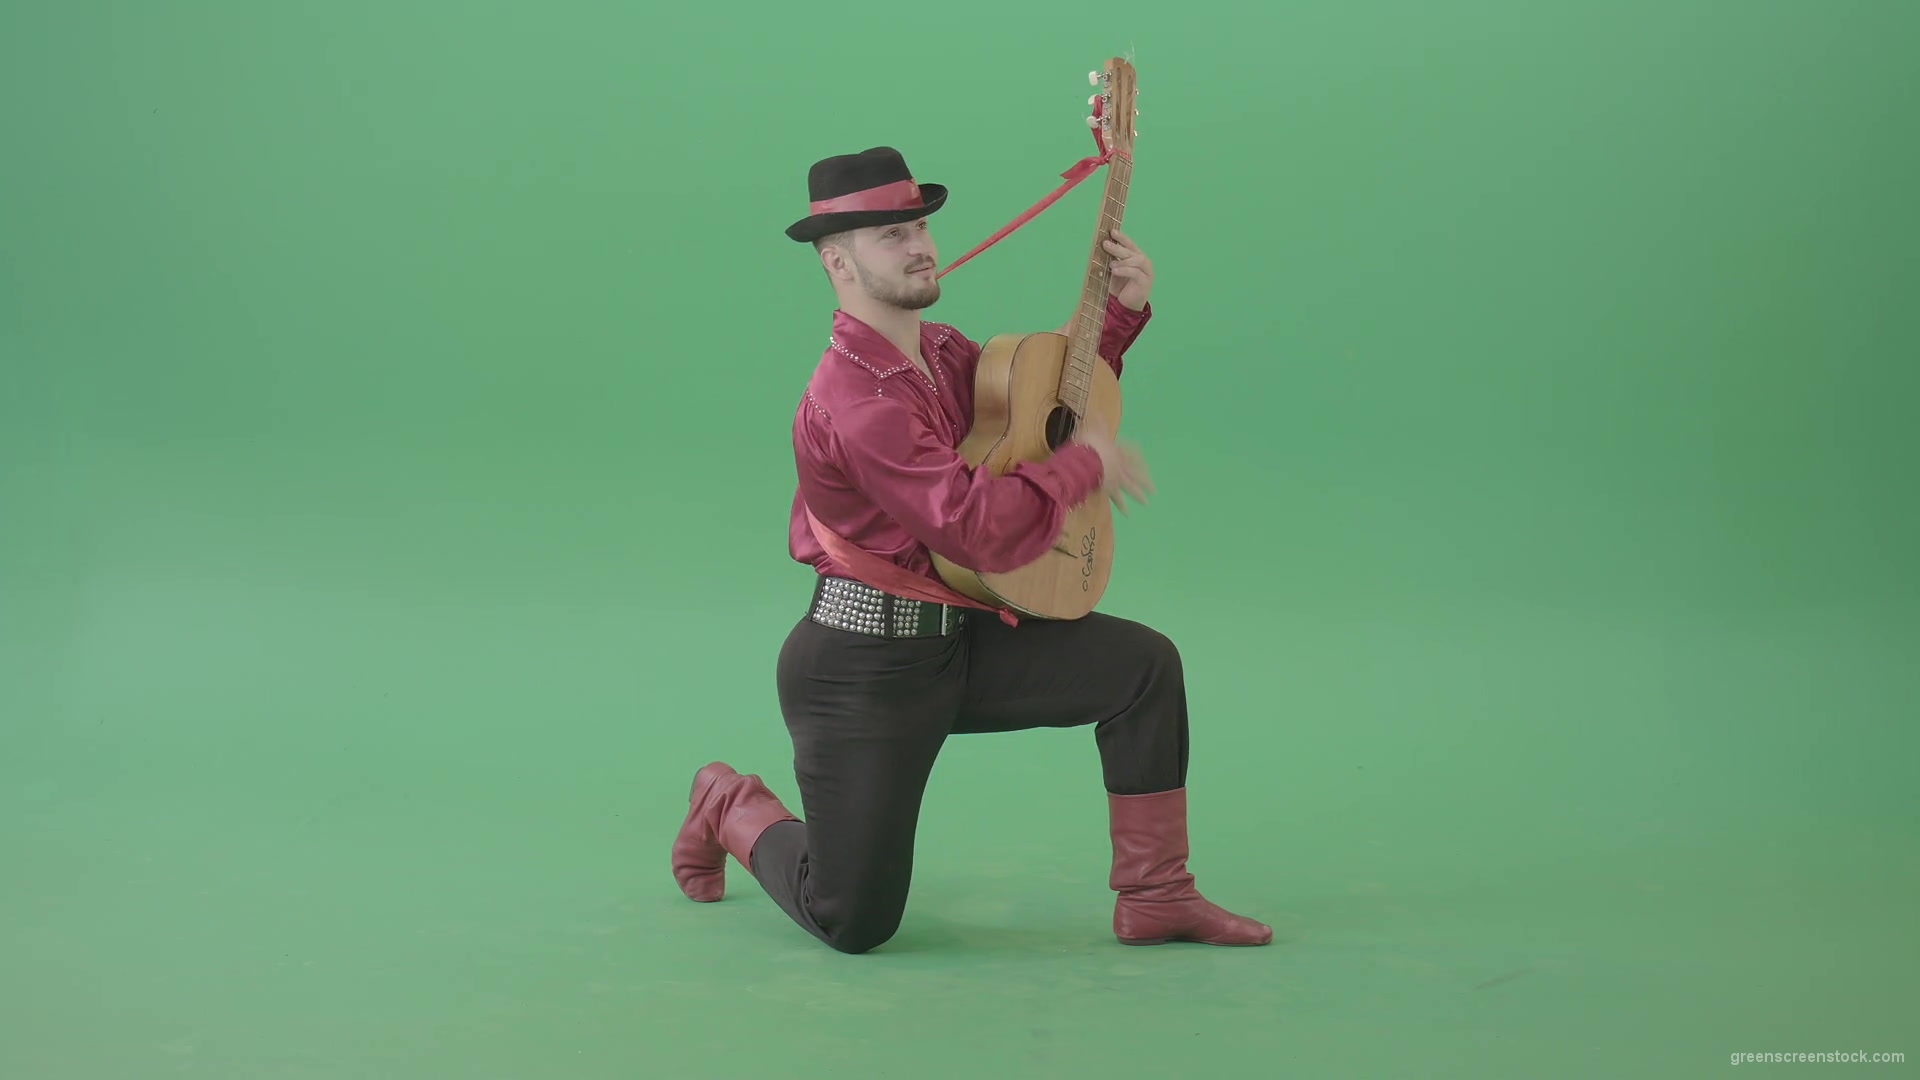 Man-in-Gipsy-costume-playing-love-song-on-guitar-isolated-on-green-screen-4K-Video-Footage-1920_008 Green Screen Stock